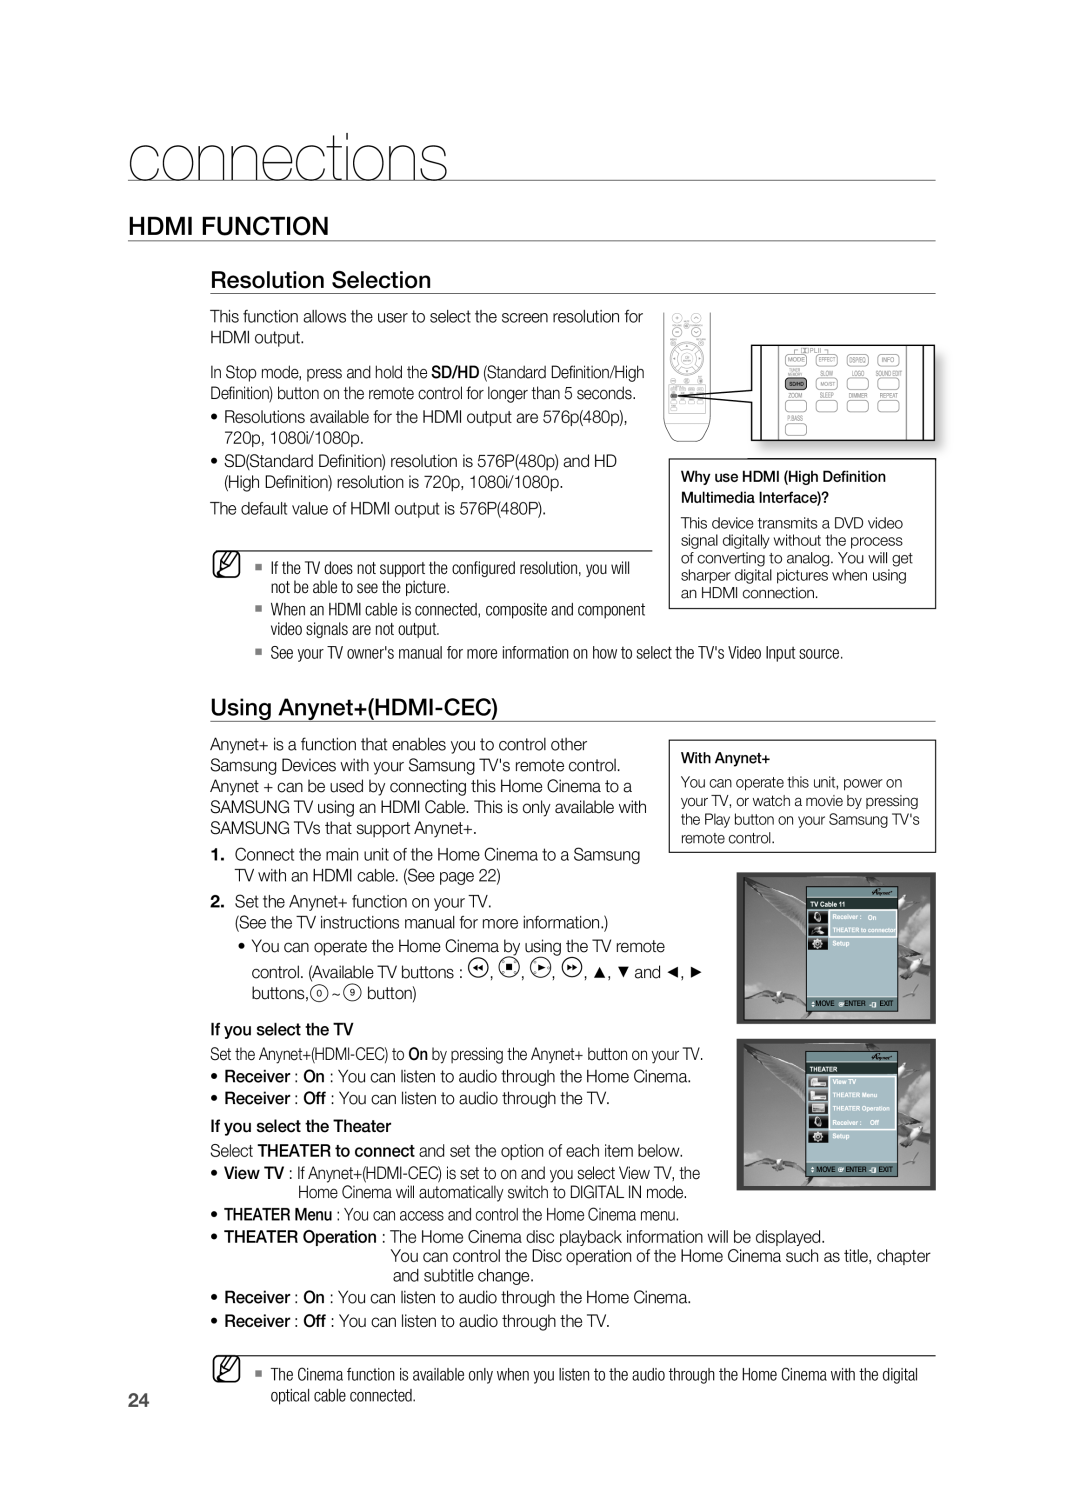 Samsung HT-TX715 user manual Hdmi Function, connections, resolution Selection, Using Anynet+HDMI-CEC 